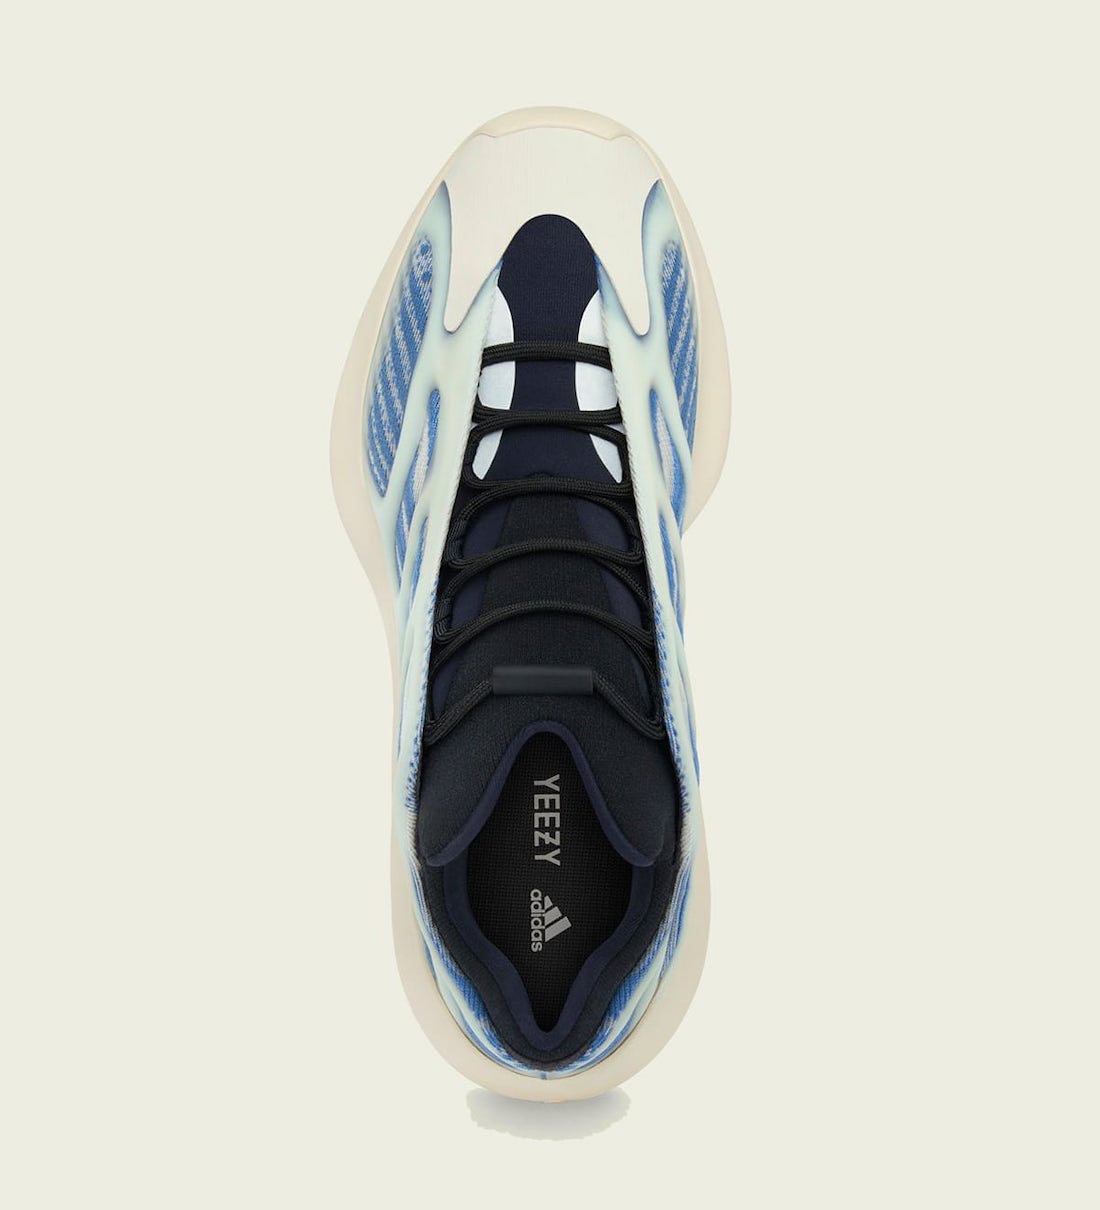 kyanite adidas yeezy 700 v3 GY0260 release date 3